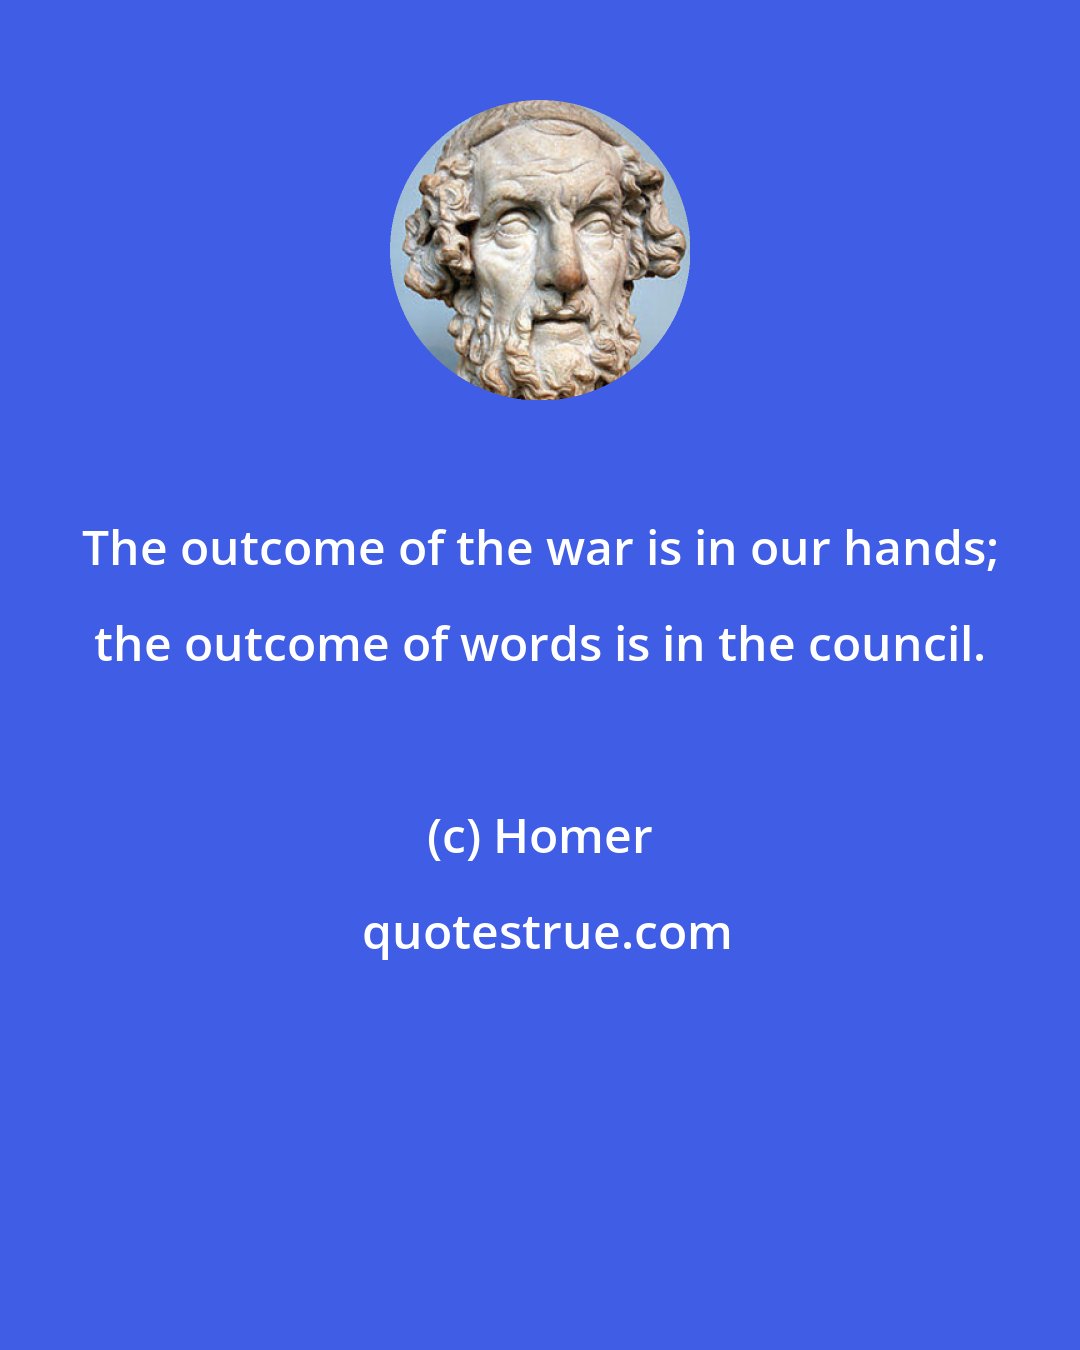 Homer: The outcome of the war is in our hands; the outcome of words is in the council.